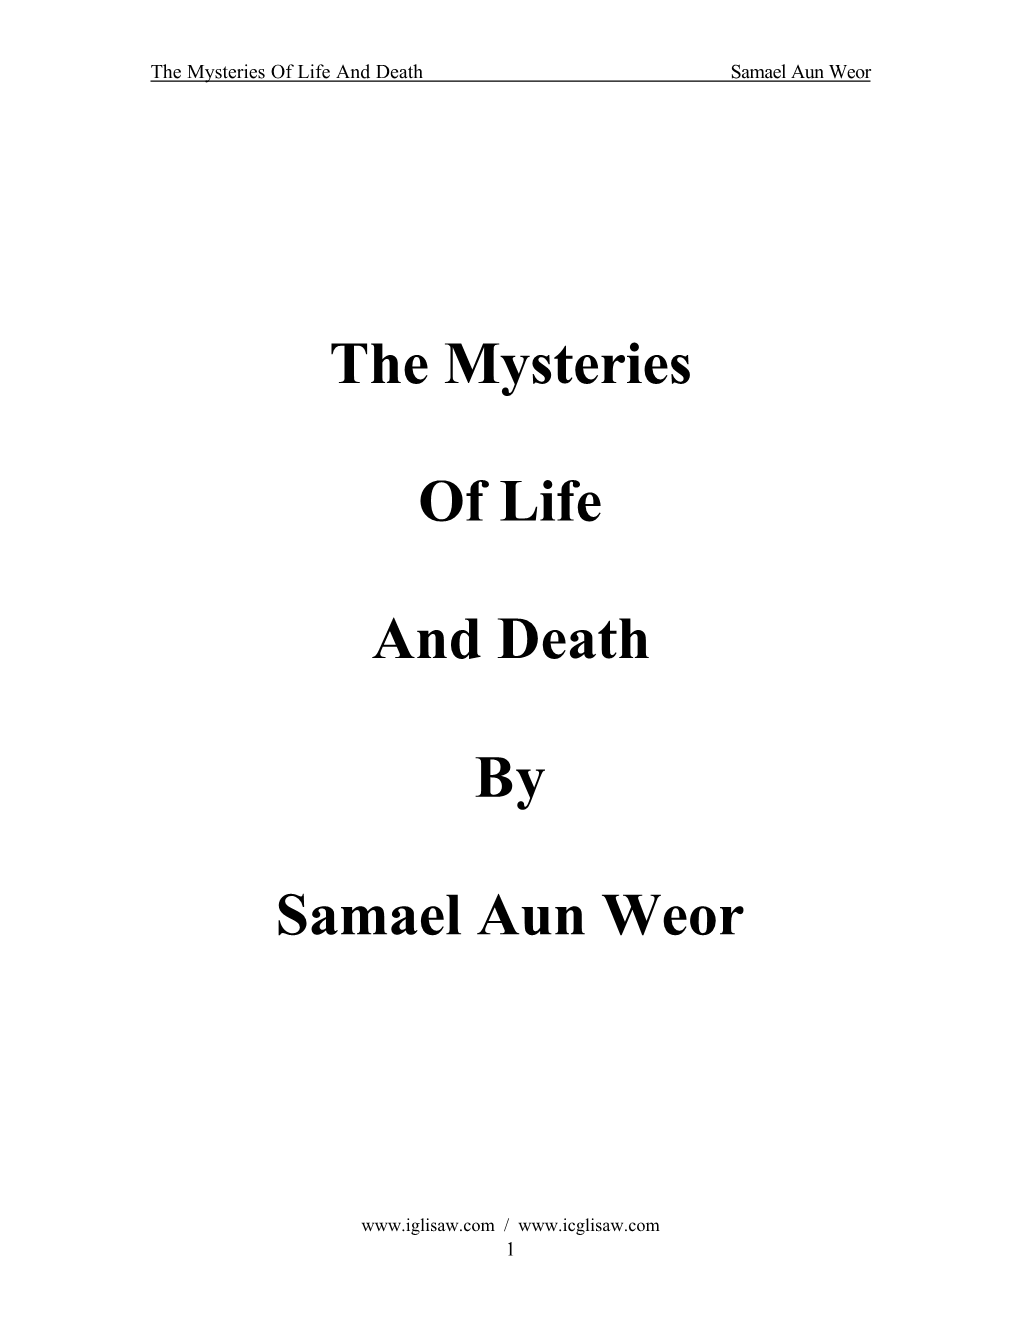 The Mysteries of Life and Death by Samael Aun Weor